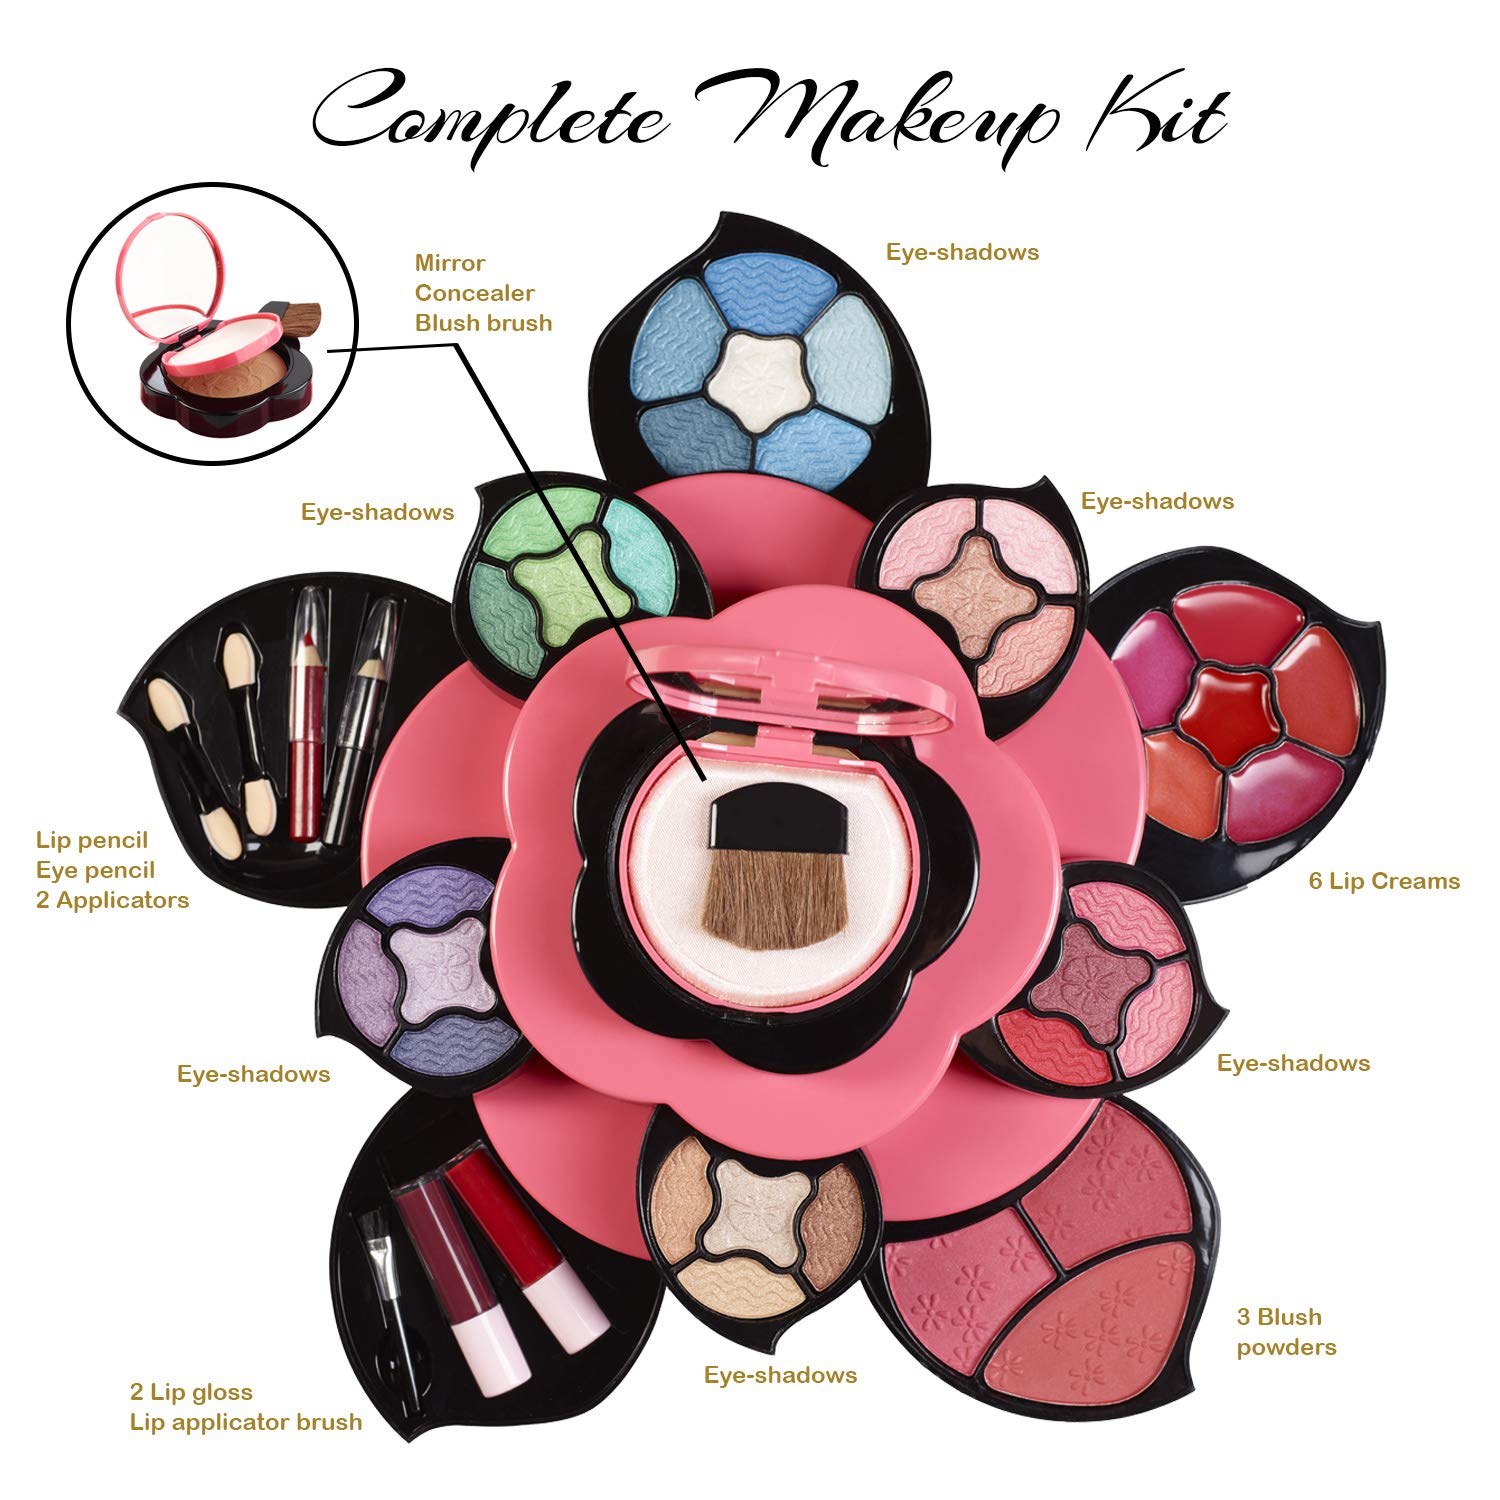 Toysical Makeup Kits for Teens - Flower Makeup Gift Set for Mothers Day, Mom, Teen Girls, Teenagers and Women - Eye Shadow Palette Makeup